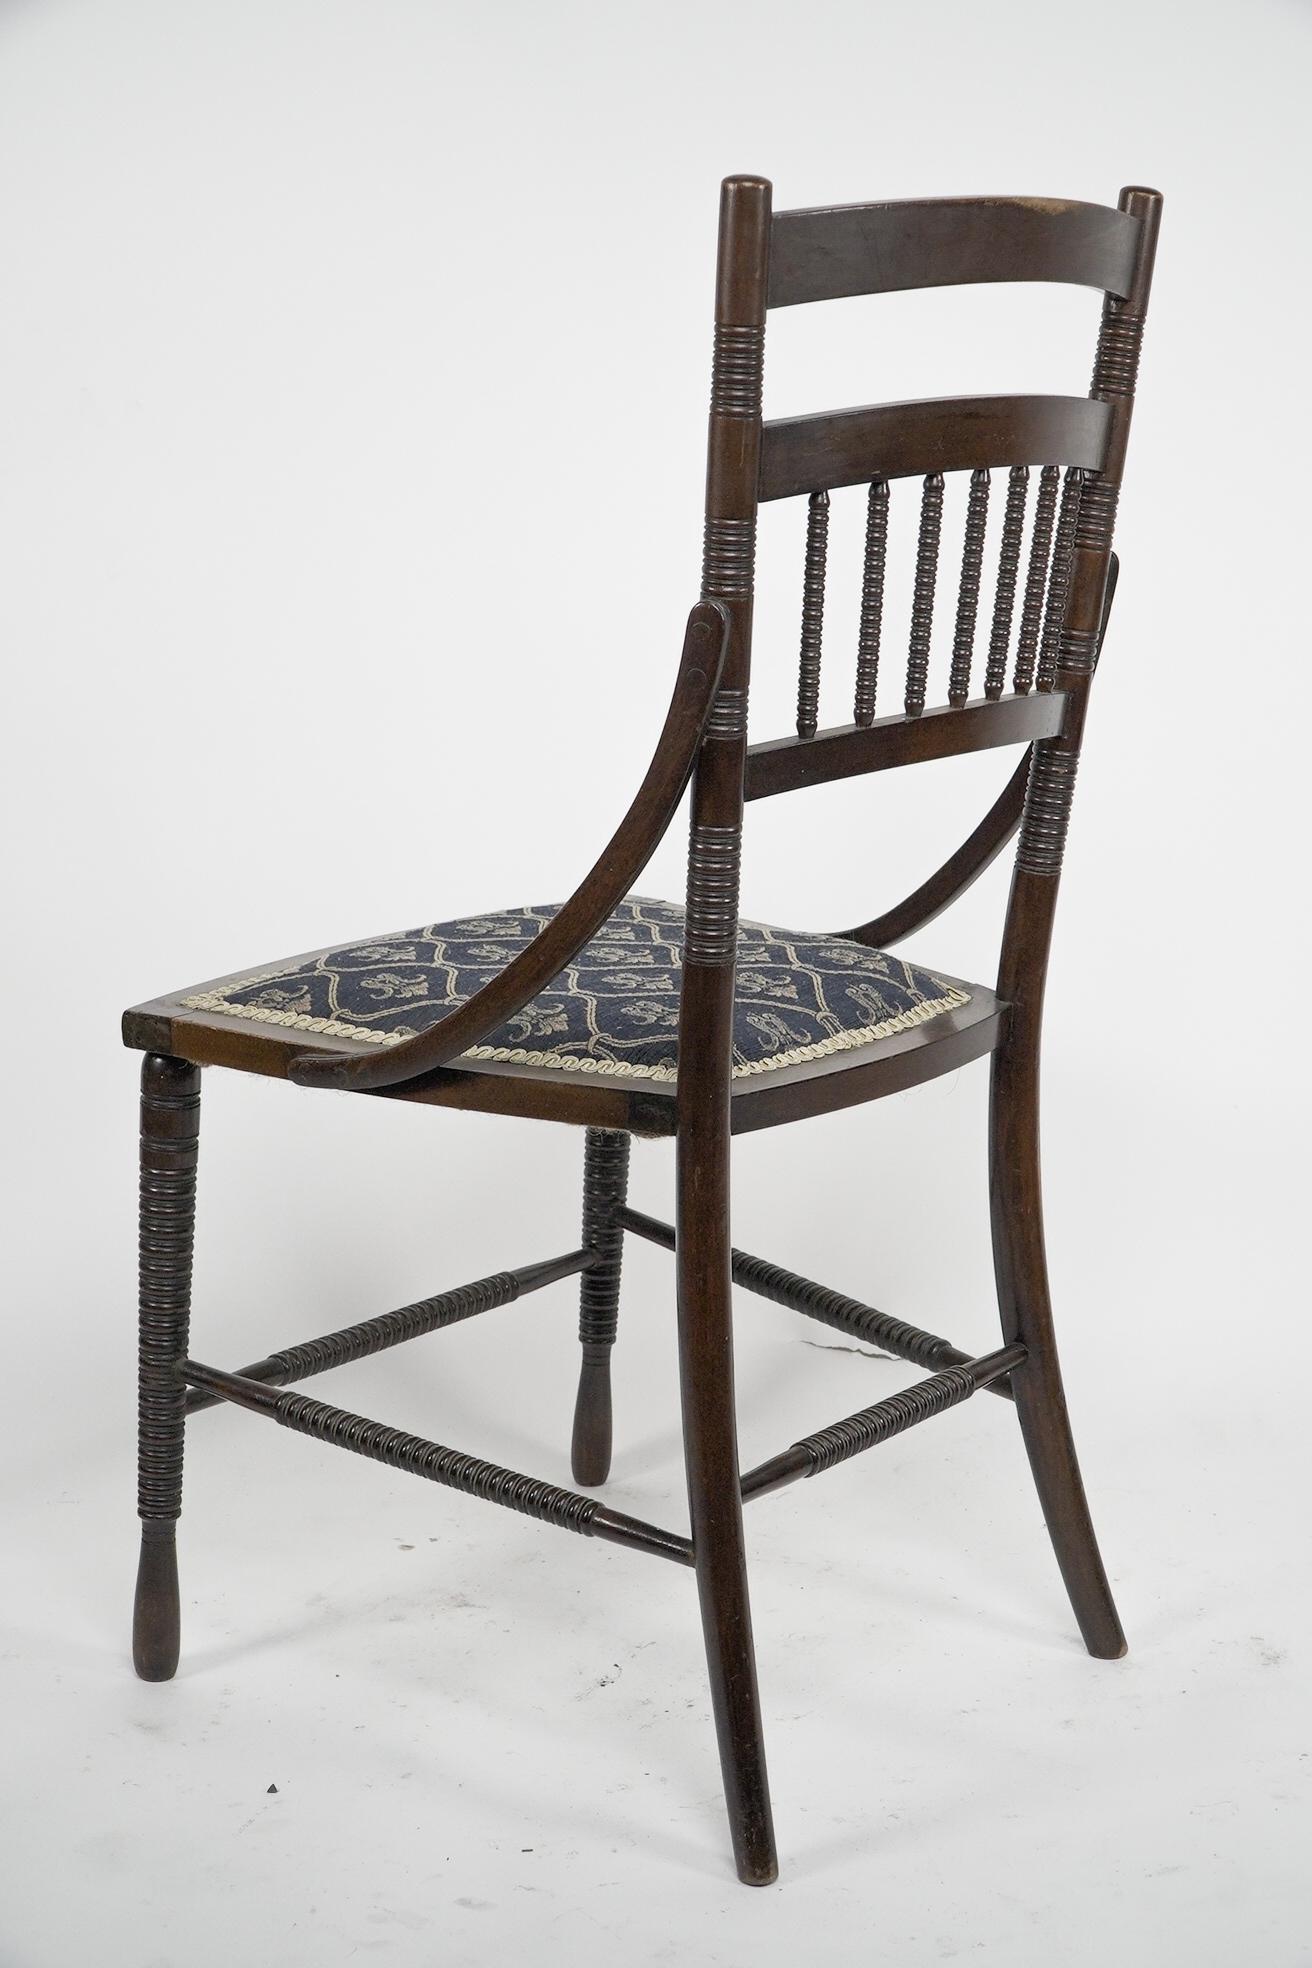 R. W. Edis, probably made by Jackson & Graham A fine pair of Walnut side chairs For Sale 12